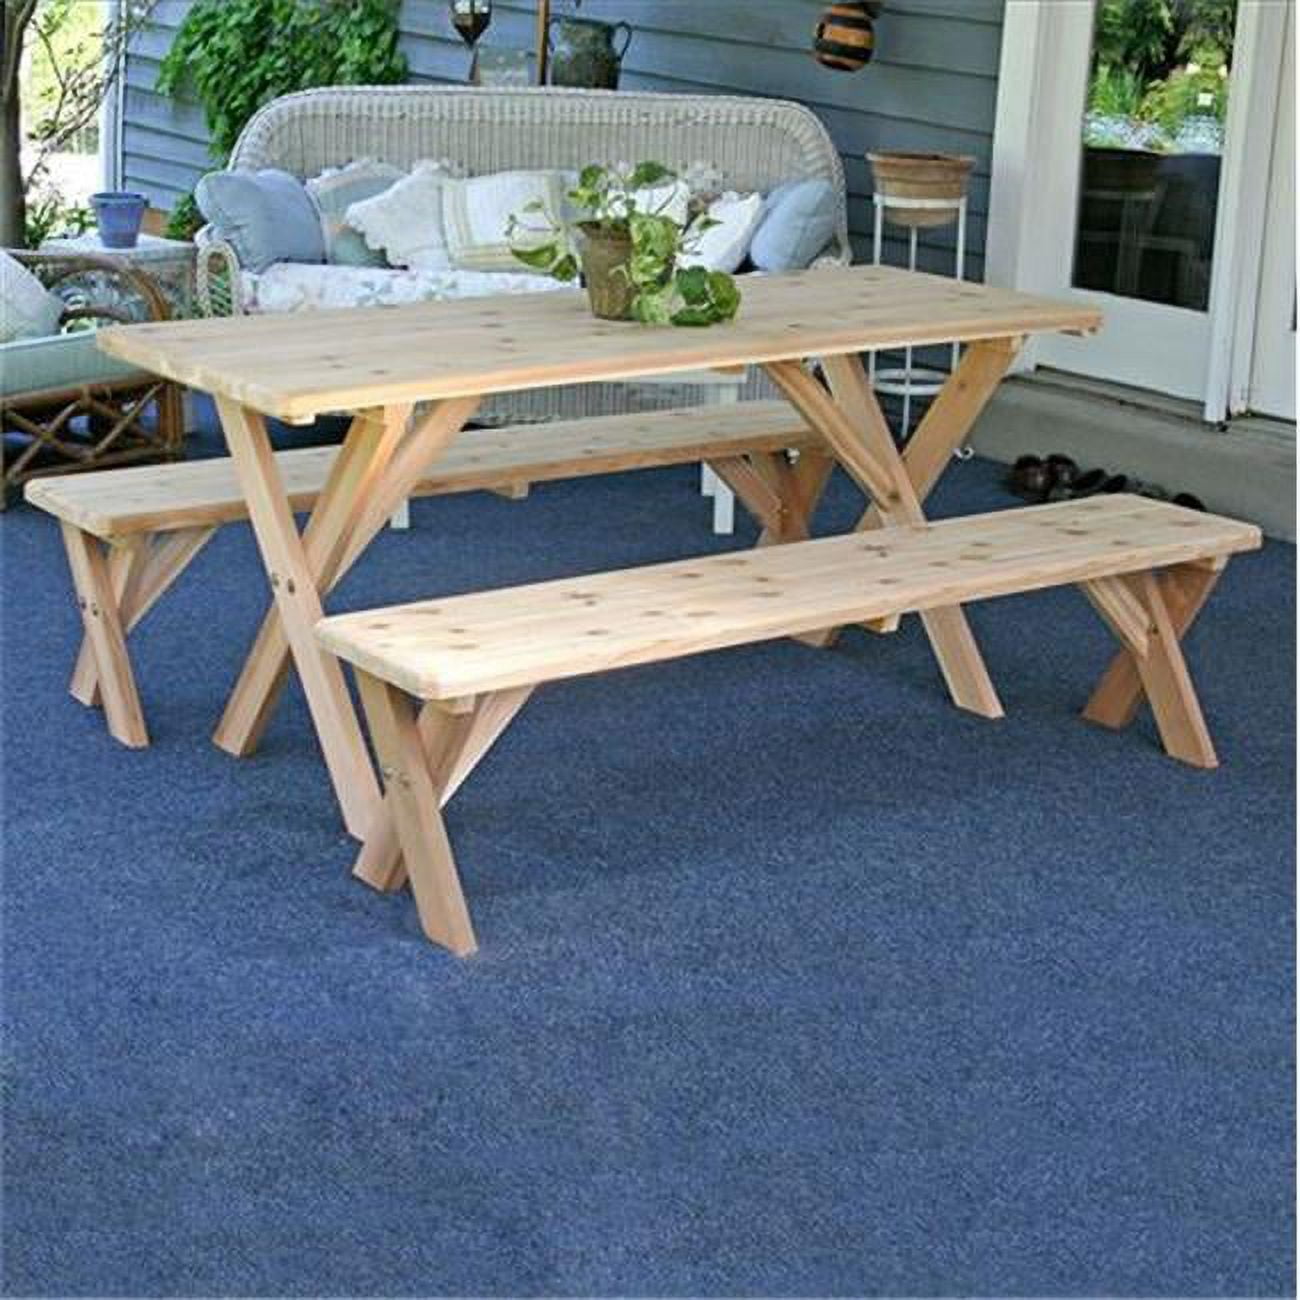 Wf27wcltcb5cvd 27 In. X 5 Ft. Red Cedar Backyard Bash Cross Legged Picnic Table With Detached Benches